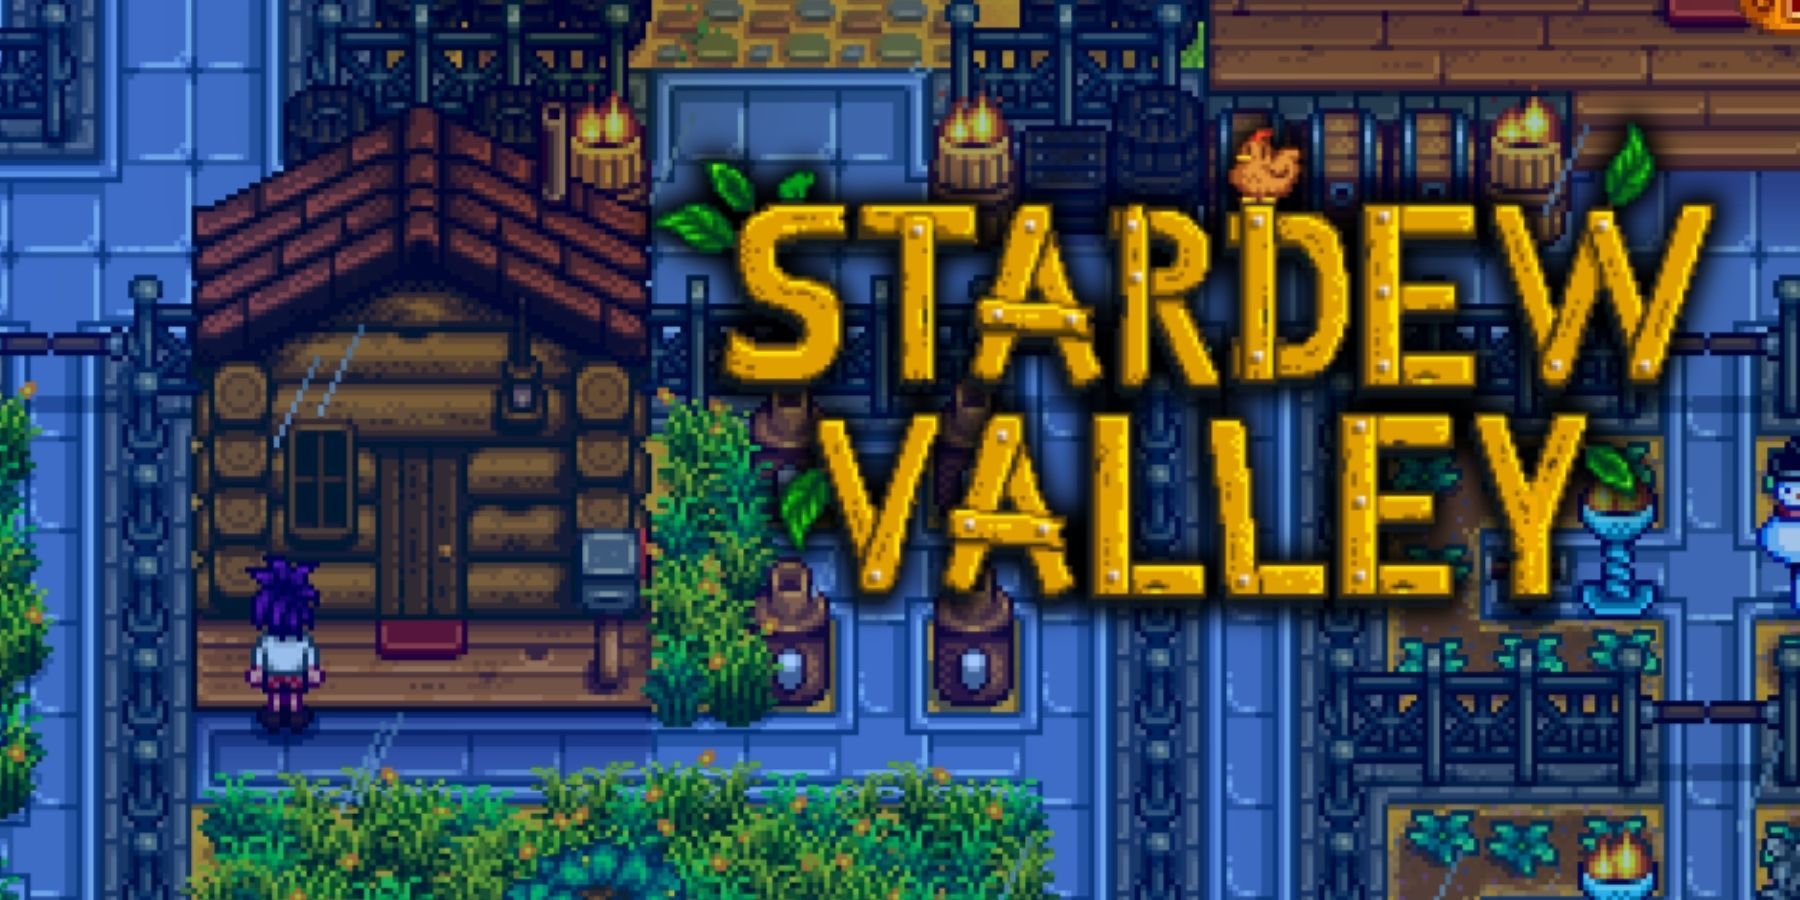 The Pros and Cons of Playing Stardew Valley in Co-Op